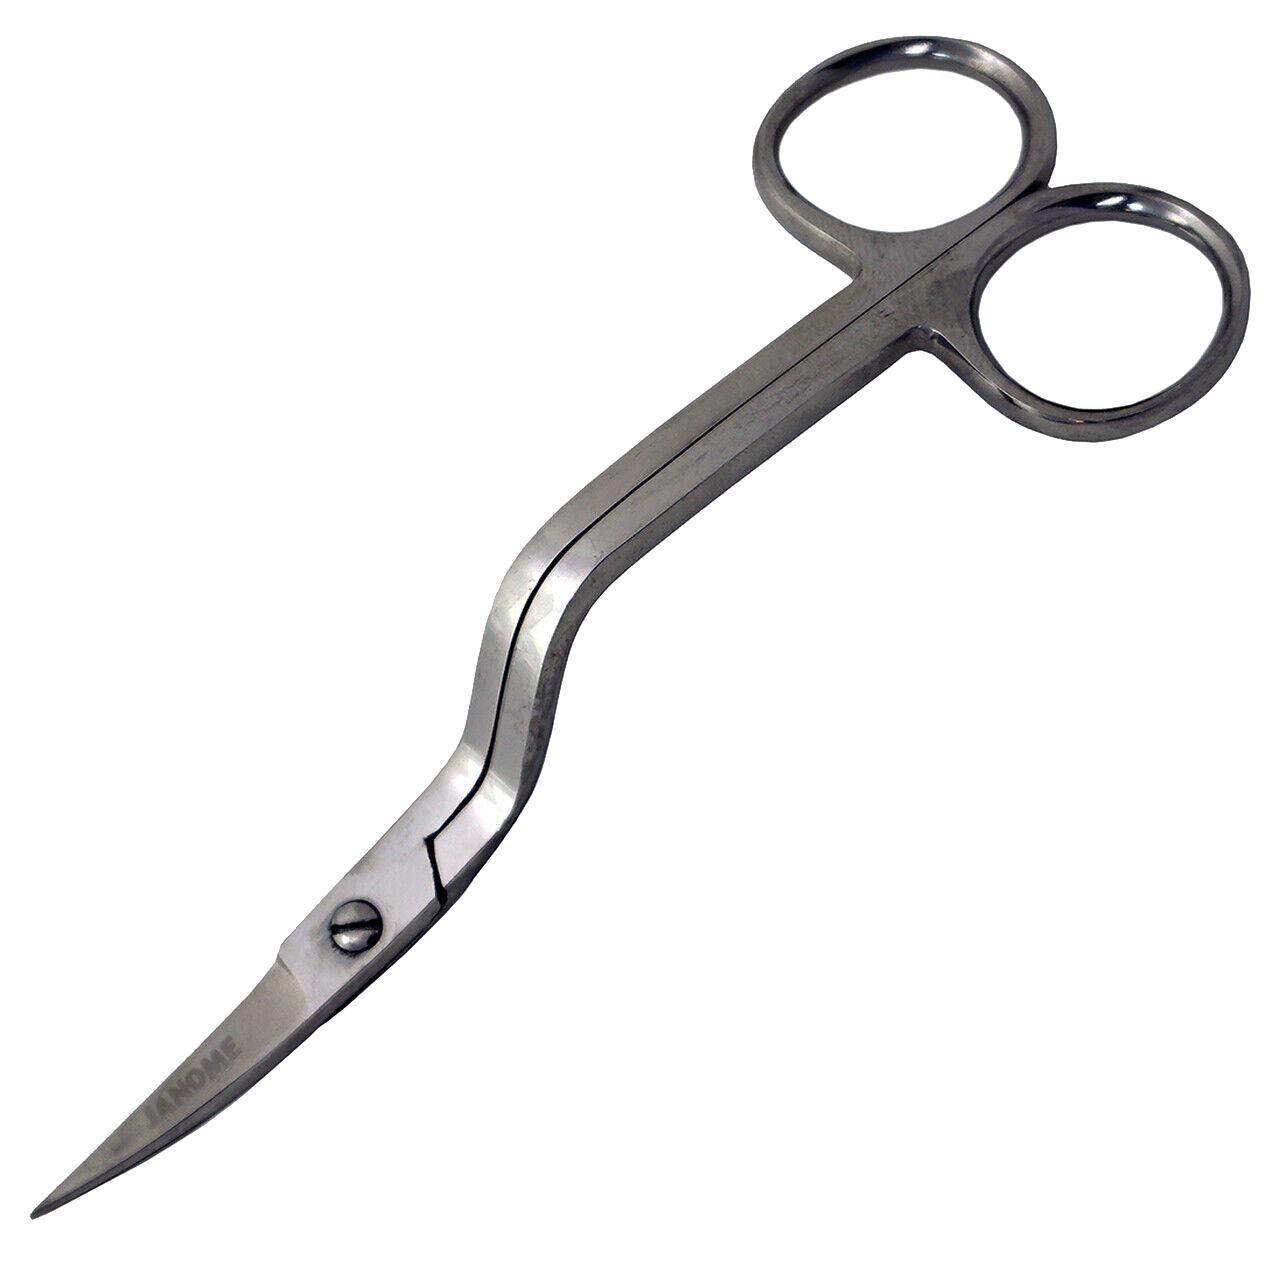 Janome Machine Embroidery Scissors for Sale at World Weidner